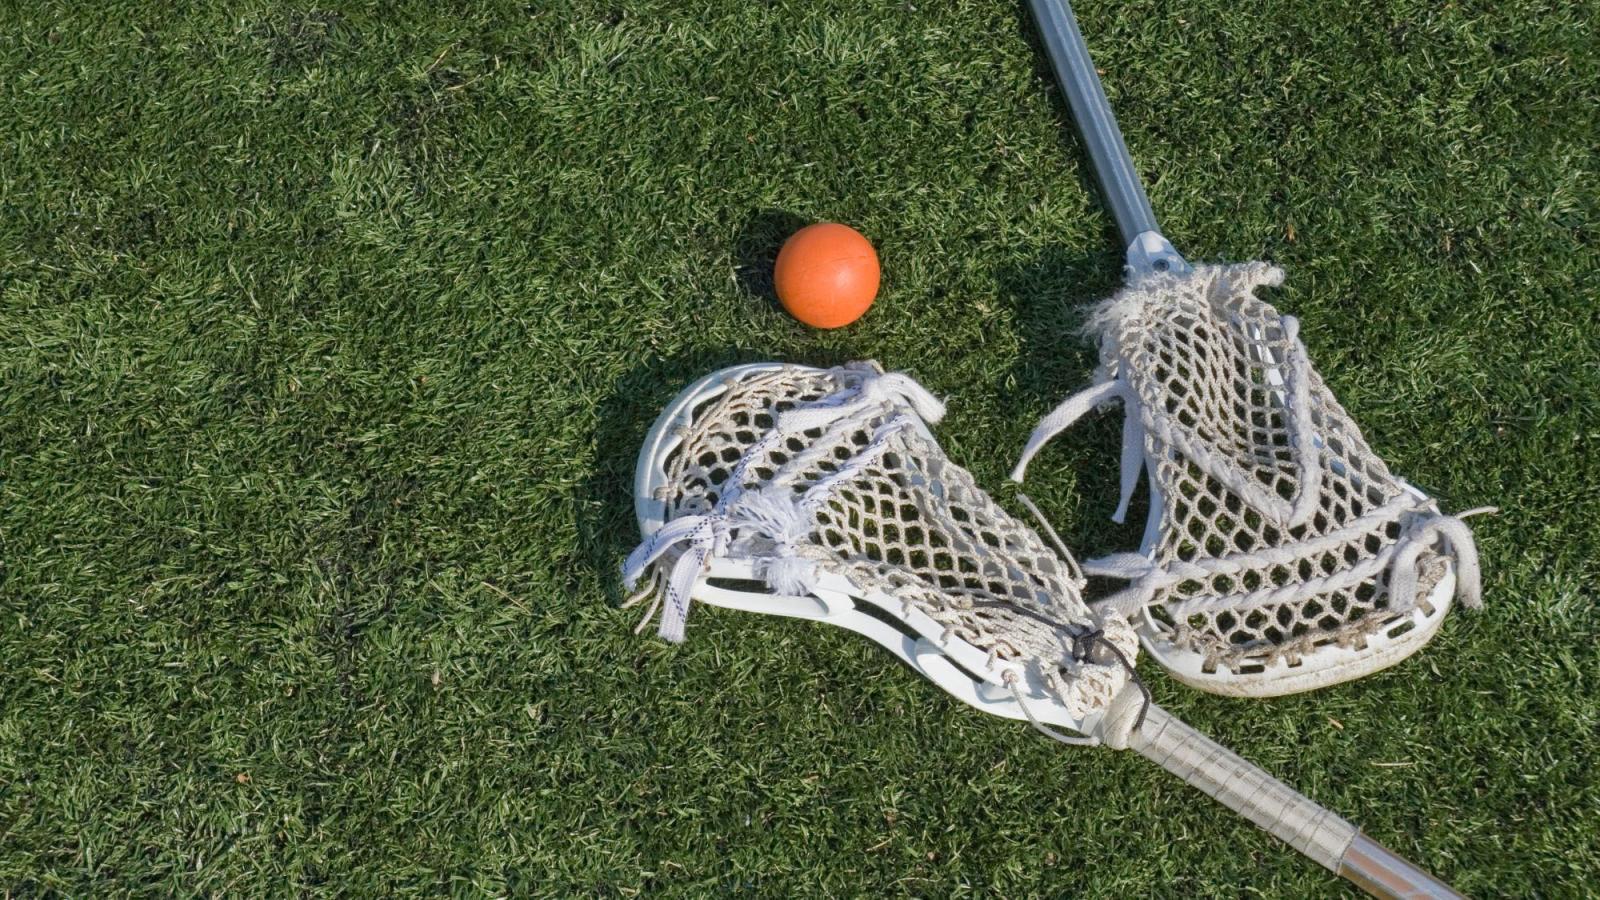 Two lacrosse sticks and a red ball lying on a grassy playing field